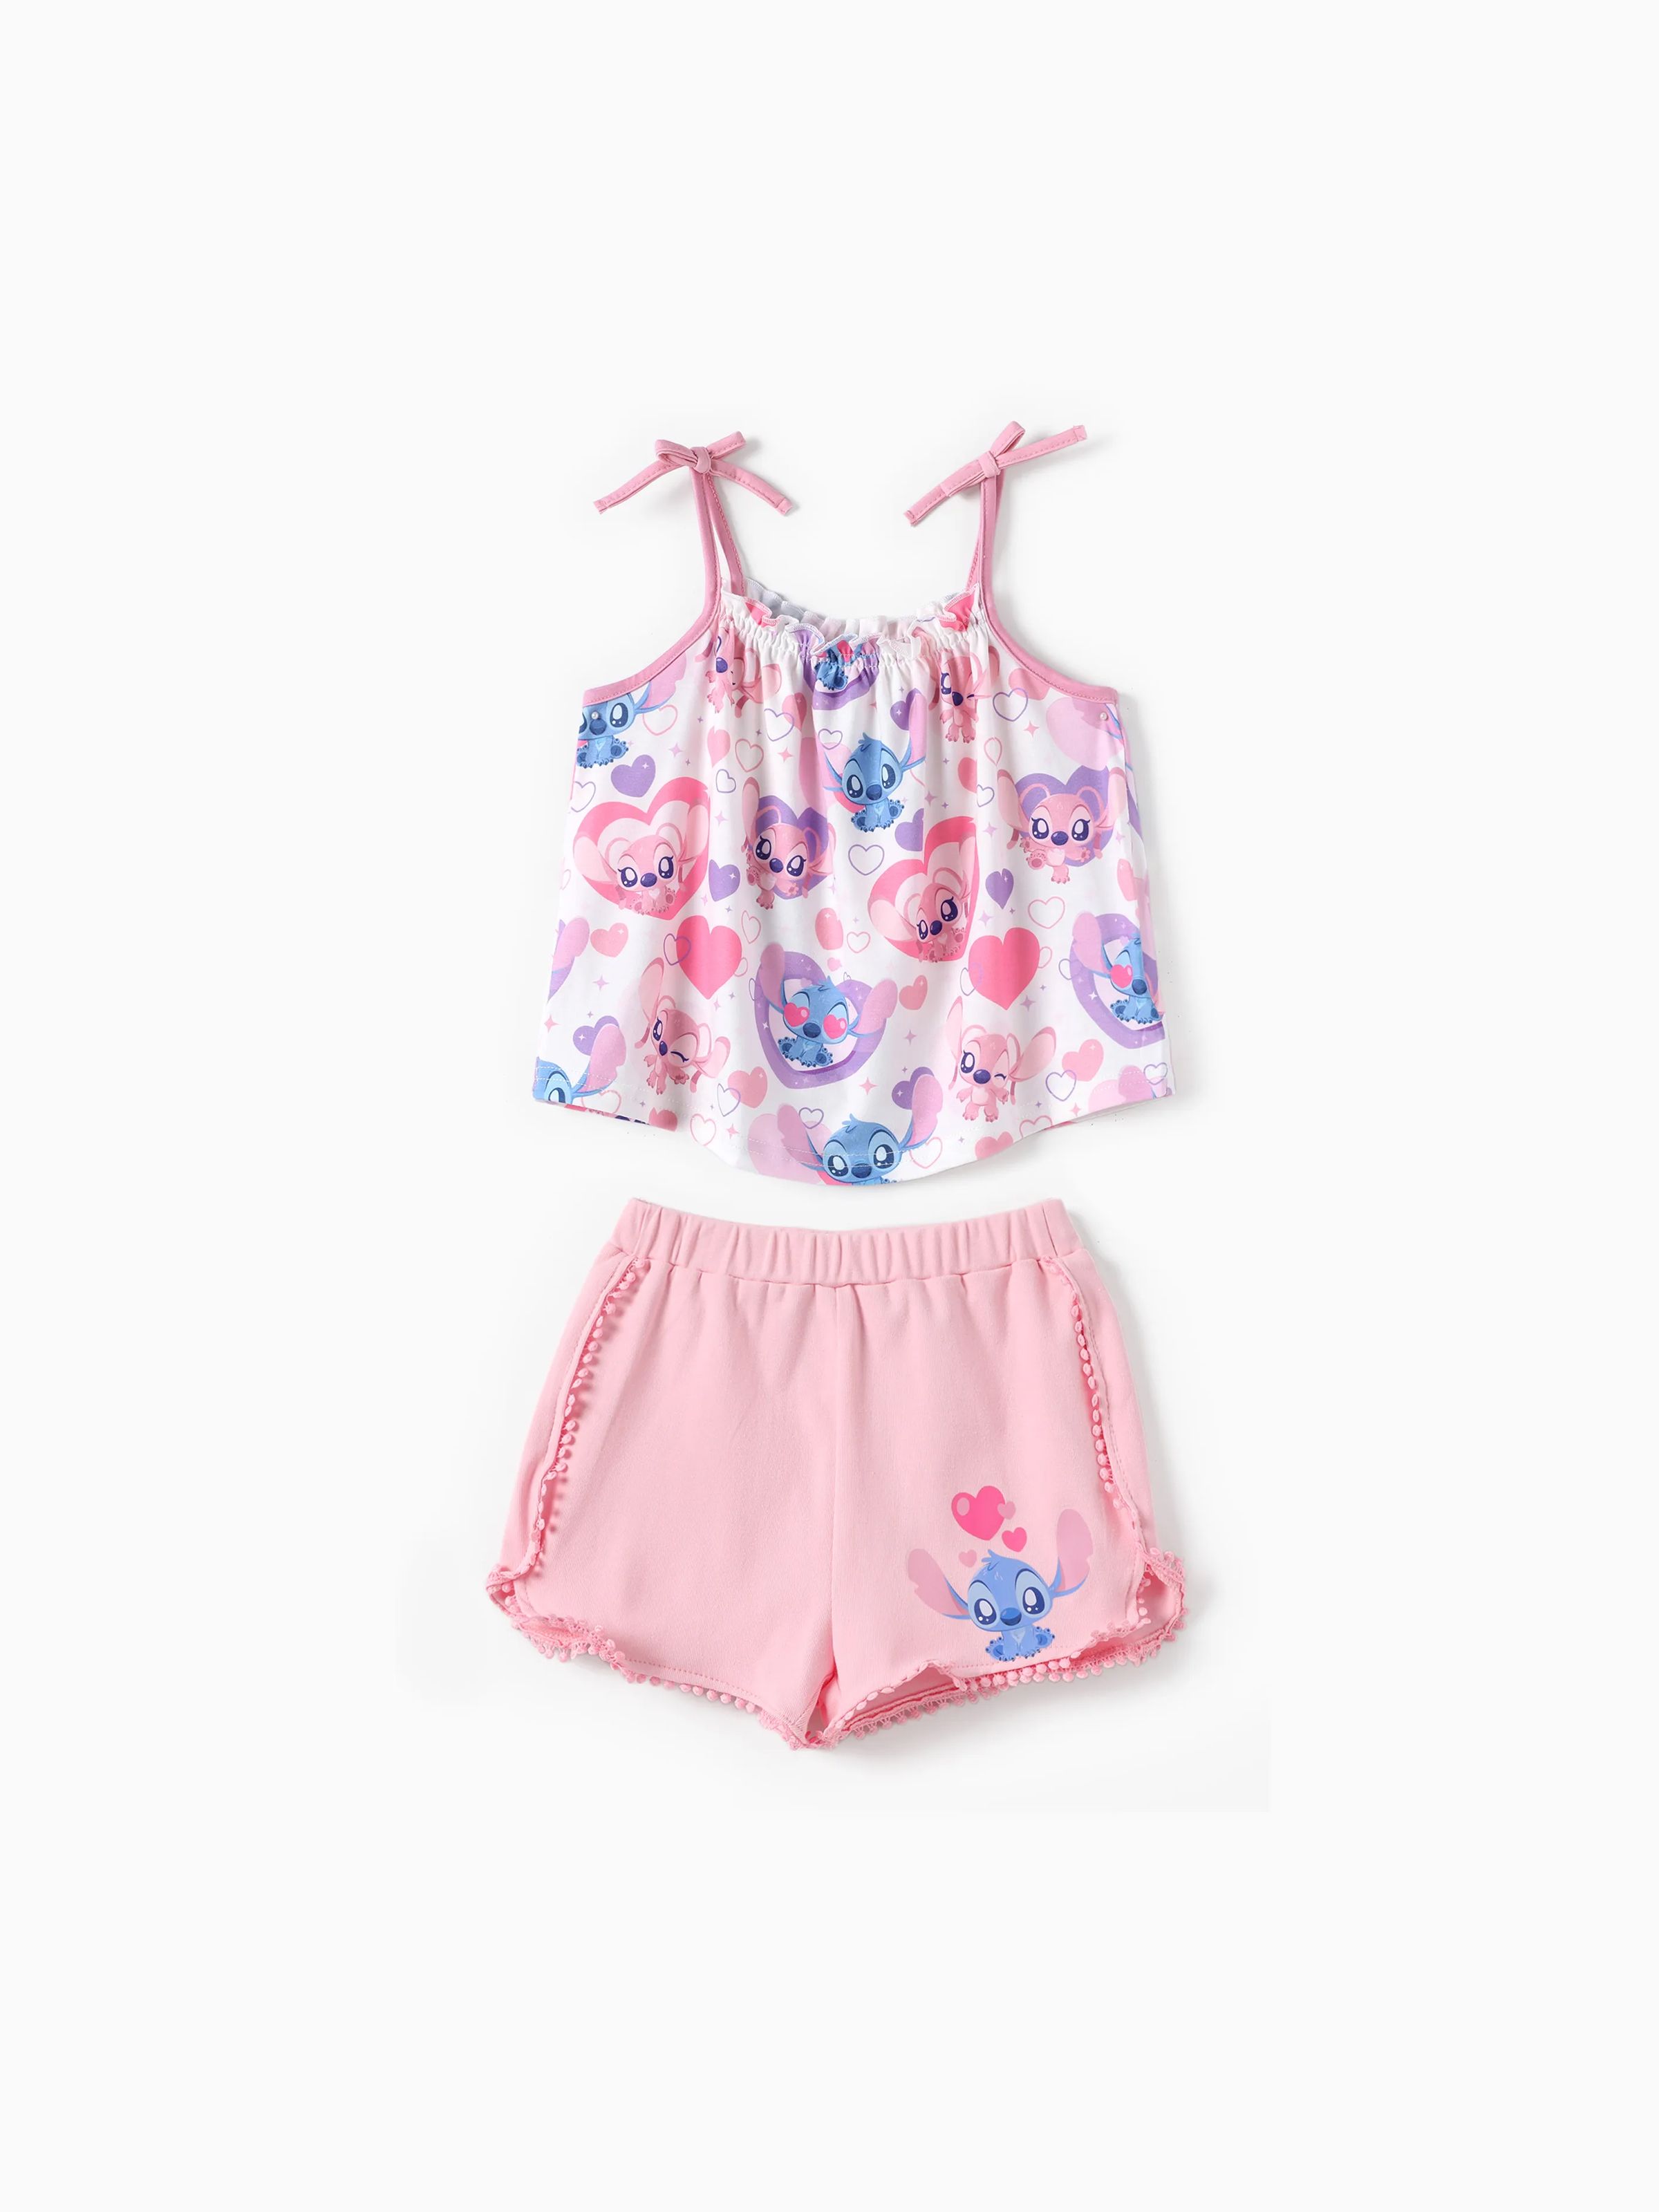 

Disney Stitch Toddler Girls 2pcs Naia™ Lovely Stitch Heart/Palm Leaf Print Shoulder Straps with Bows Top with Shorts Set